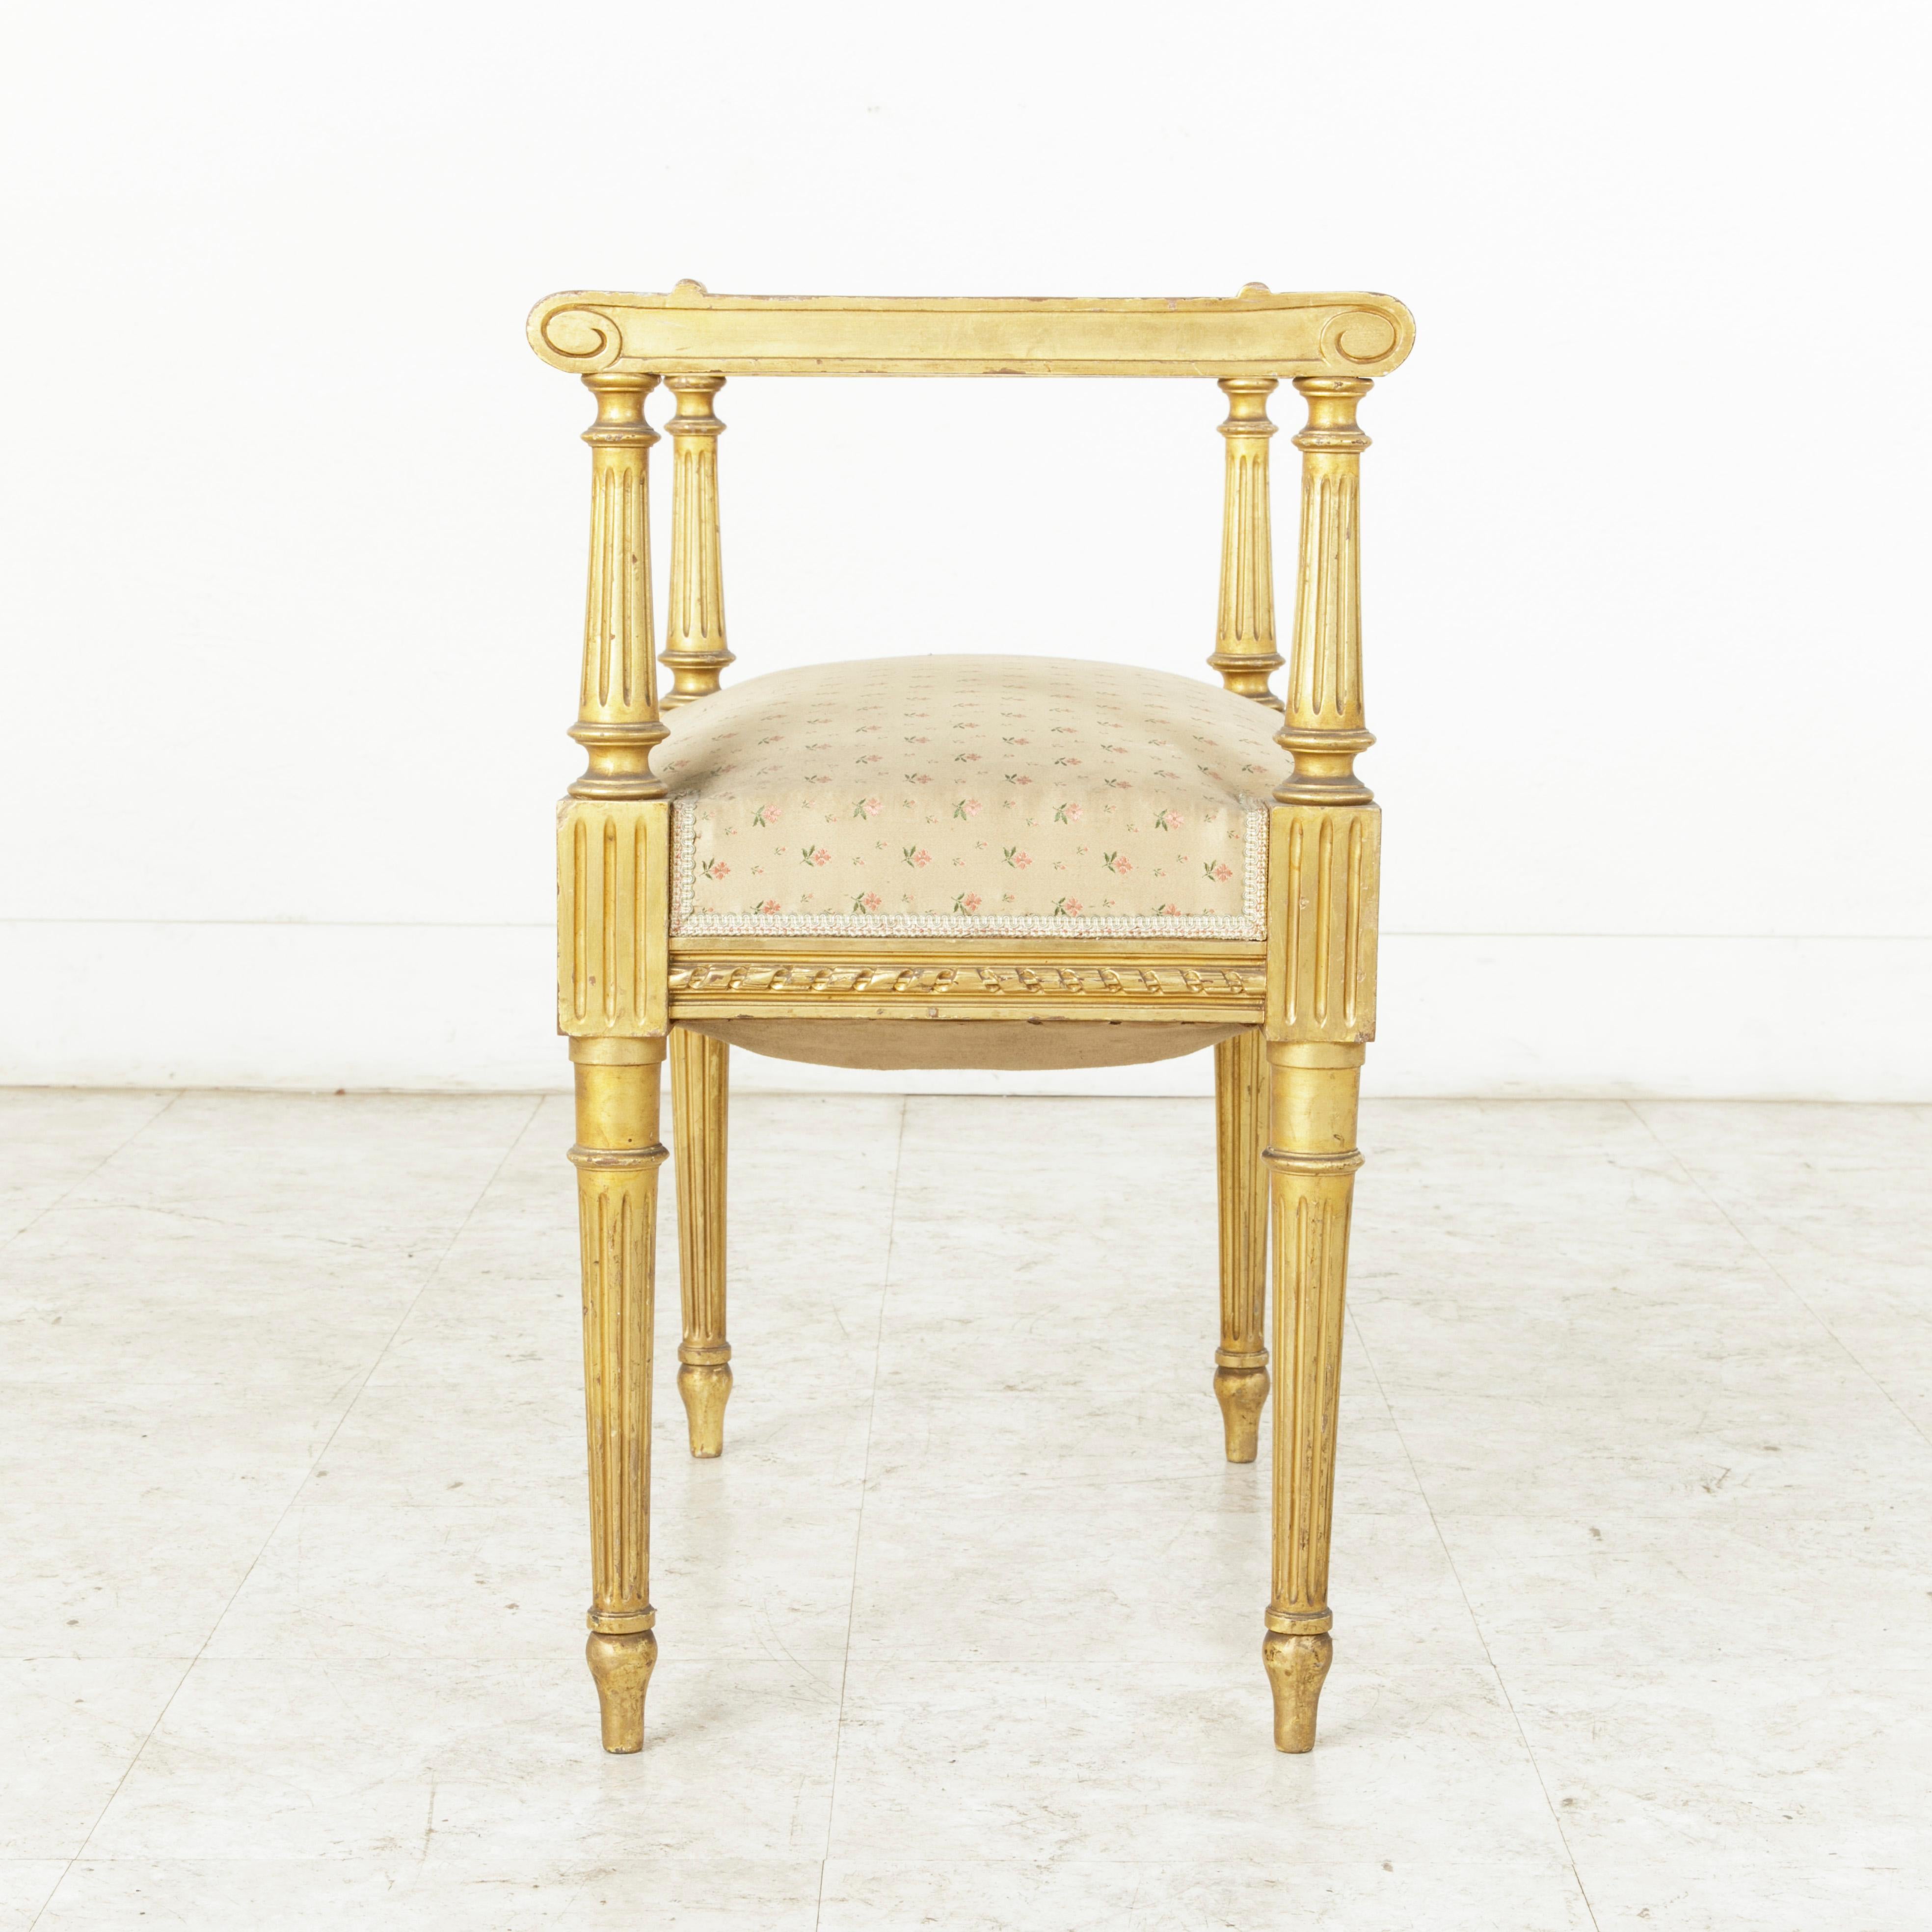 Early 20th Century French Louis XVI Style Giltwood Banquette Vanity Stool Bench 1